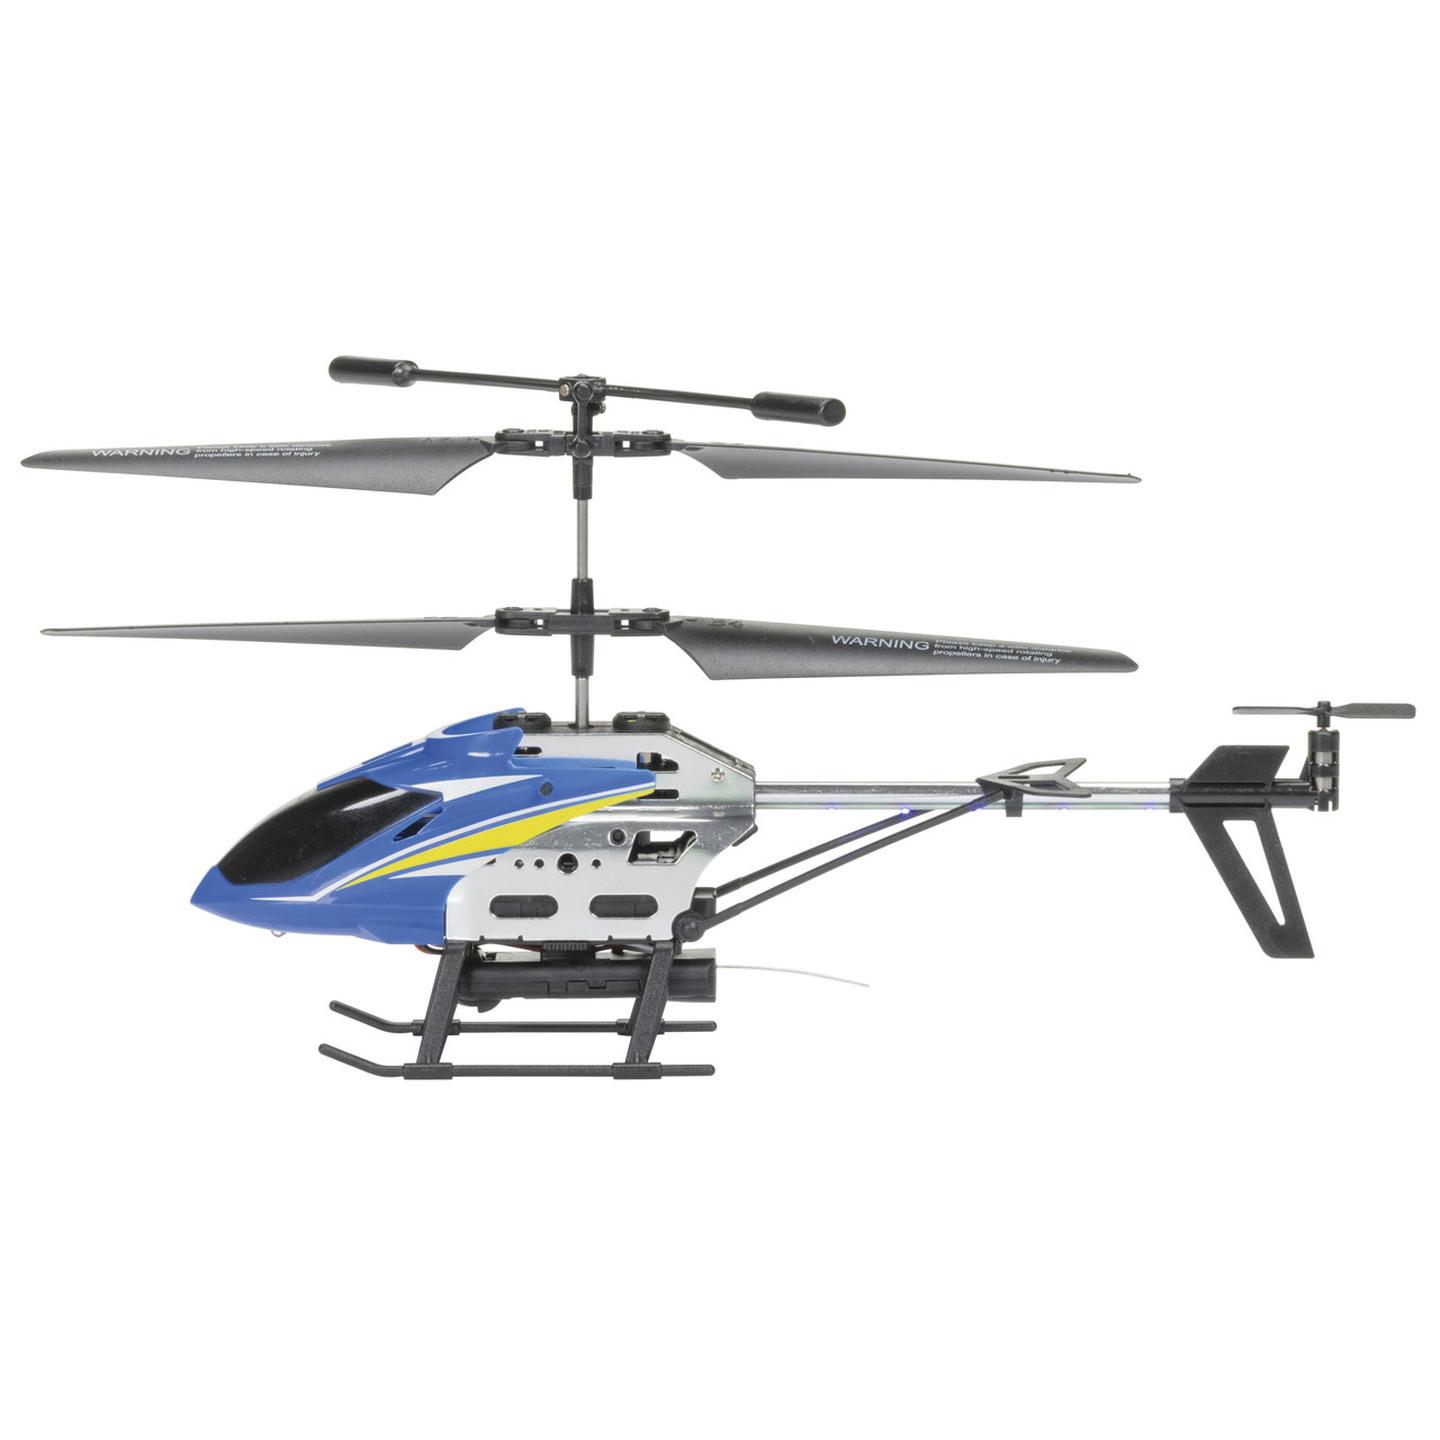 3.5CH FPV R/C Helicopter with 720p Camera